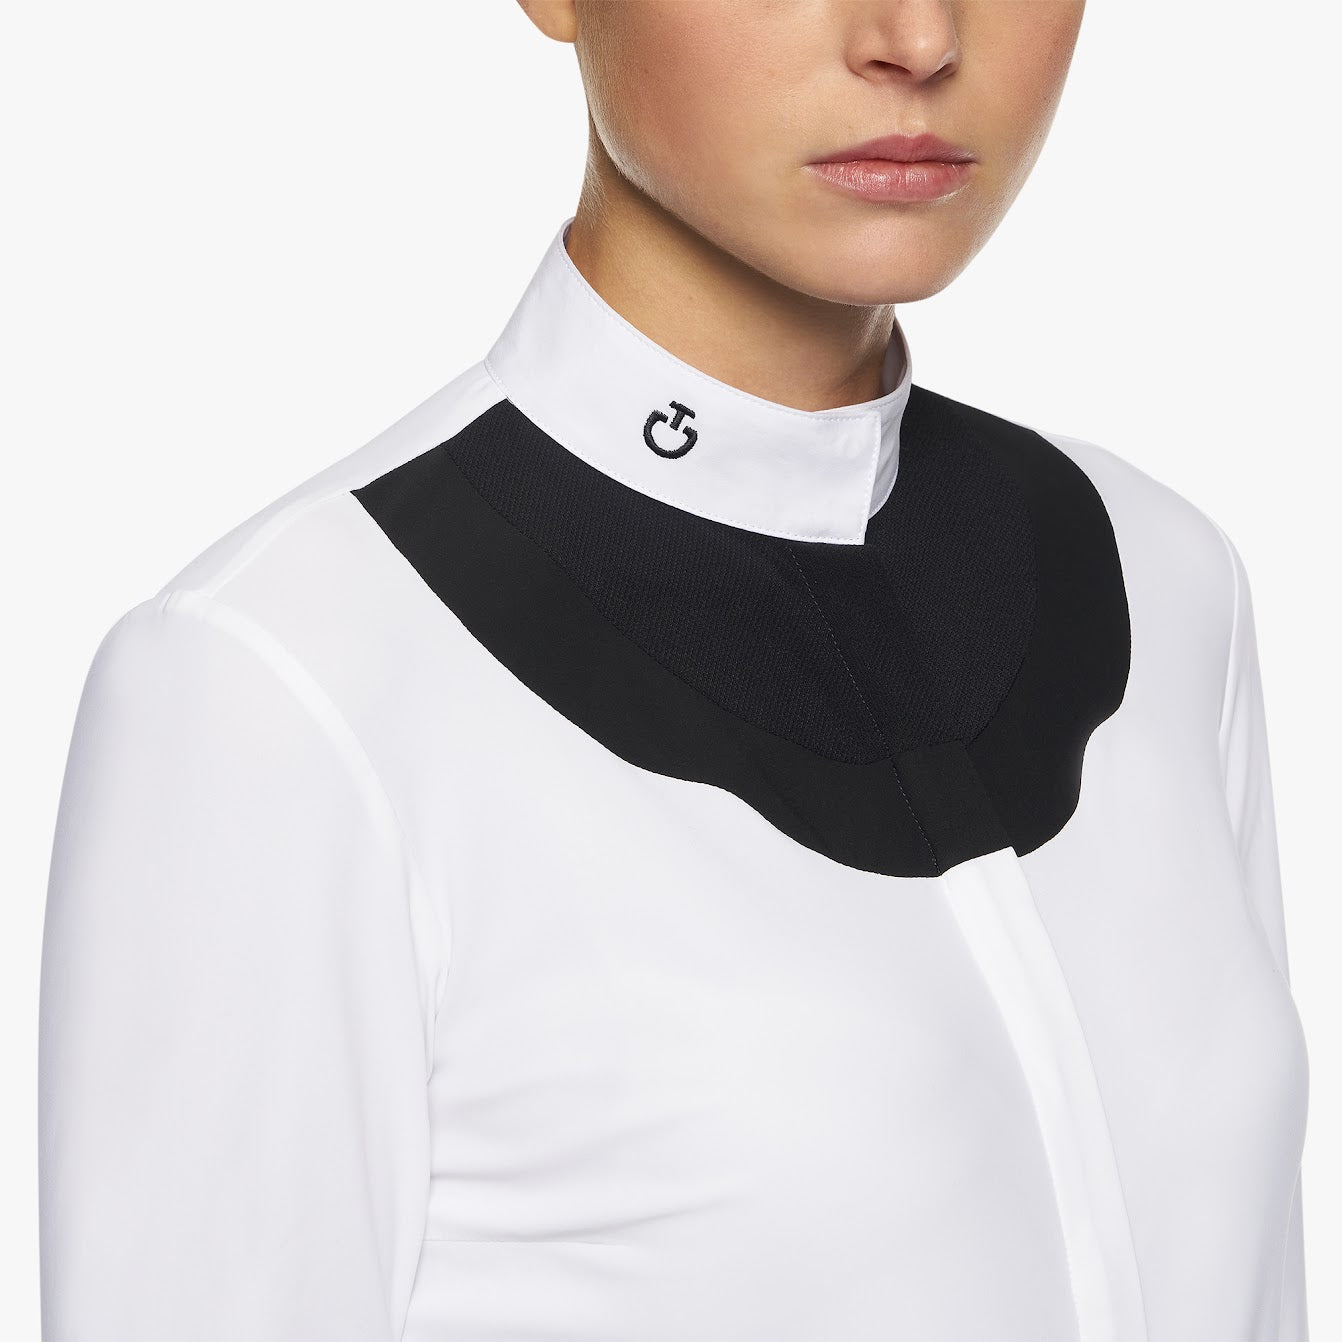 Stand out from the crowd with the stunning Cavalleria Toscana Scalloped long sleeve show shirt. The show shirt features a contrast black scallop design at the chest and cuffs adding a very modern yet sophisticated take on the white shirt. Finished with the iconic embroidered CT logo on the collar .    Machine Washable 